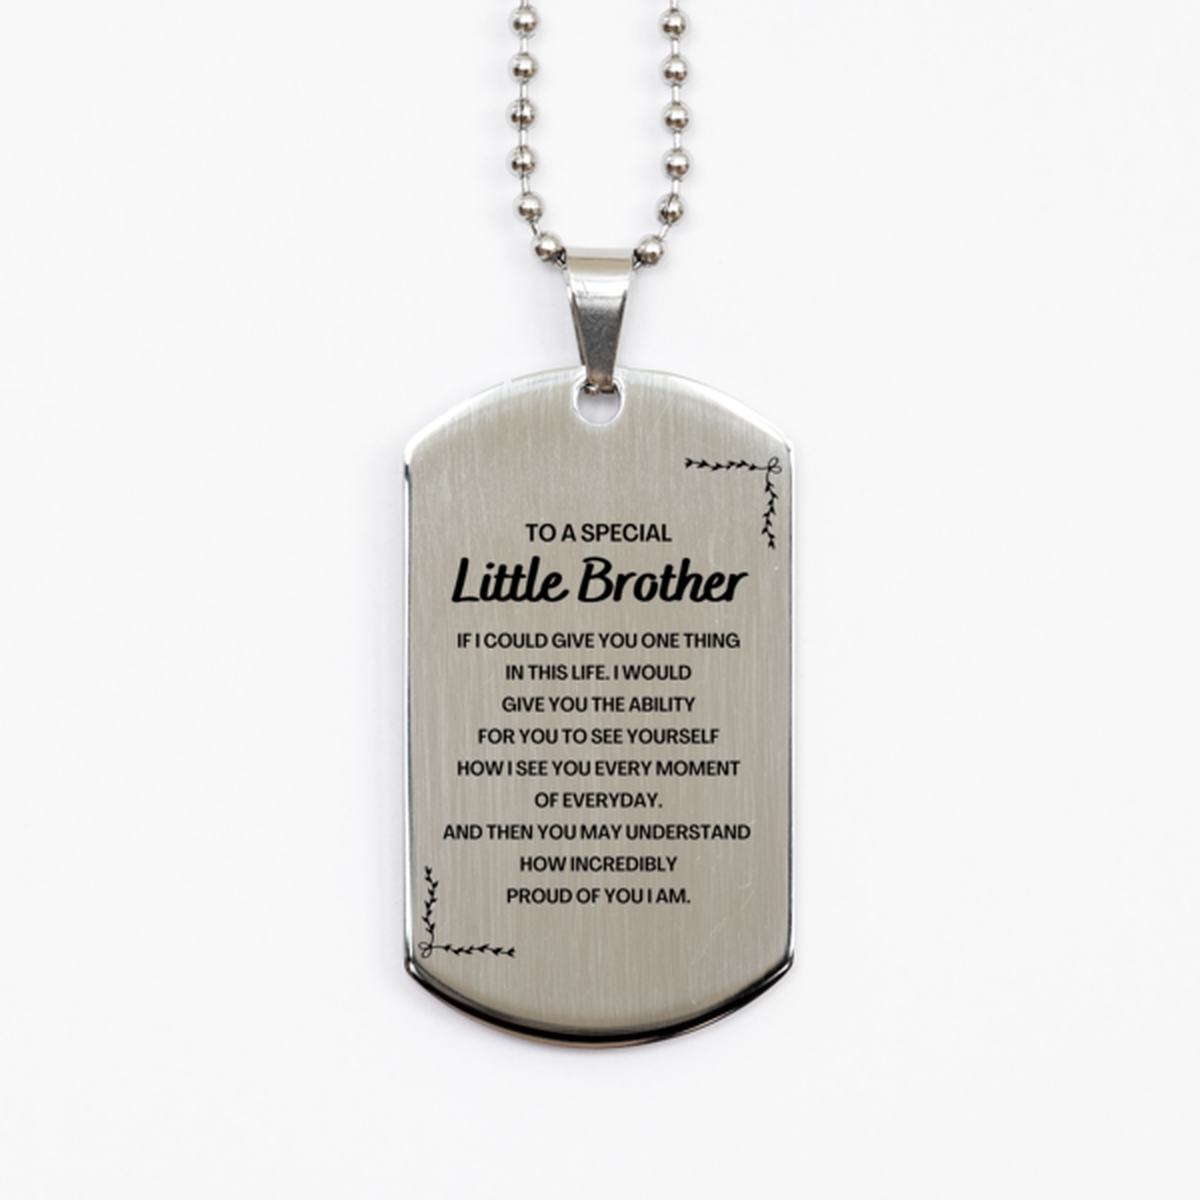 To My Little Brother Silver Dog Tag, Gifts For Little Brother Engraved, Inspirational Gifts for Christmas Birthday, Epic Gifts for Little Brother To A Special Little Brother how incredibly proud of you I am